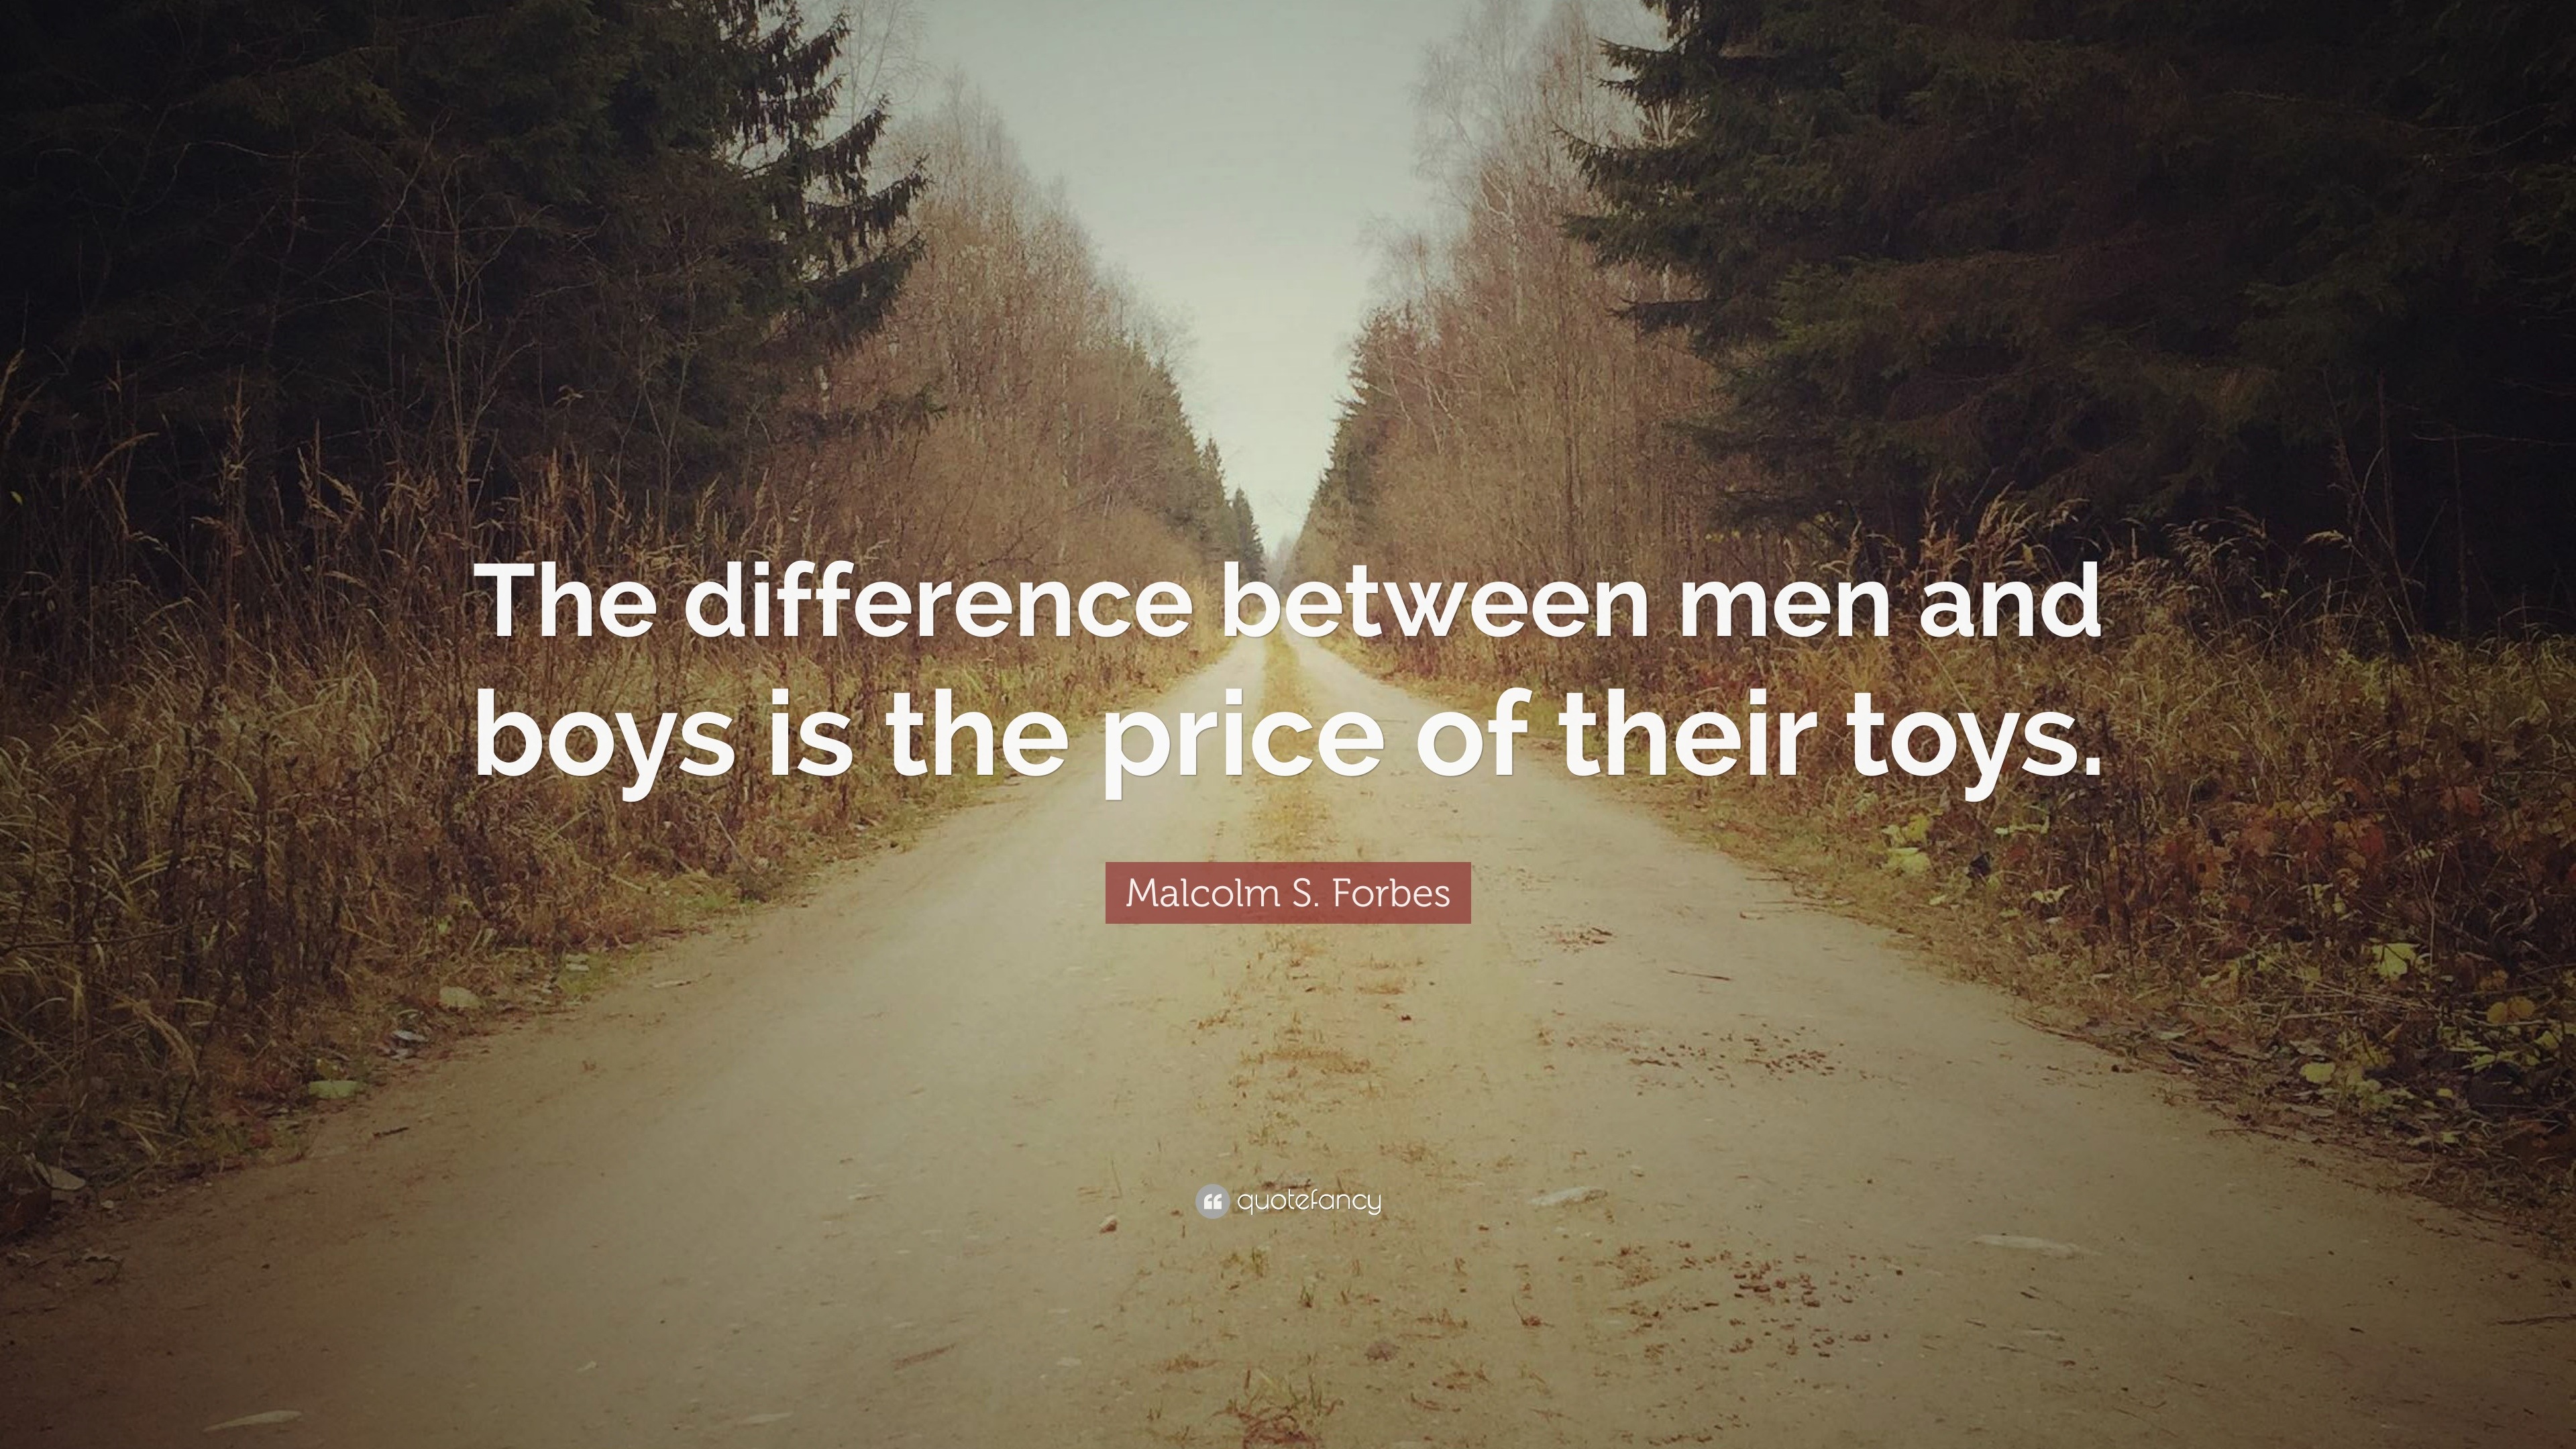 https://quotefancy.com/media/wallpaper/3840x2160/628823-Malcolm-S-Forbes-Quote-The-difference-between-men-and-boys-is-the.jpg